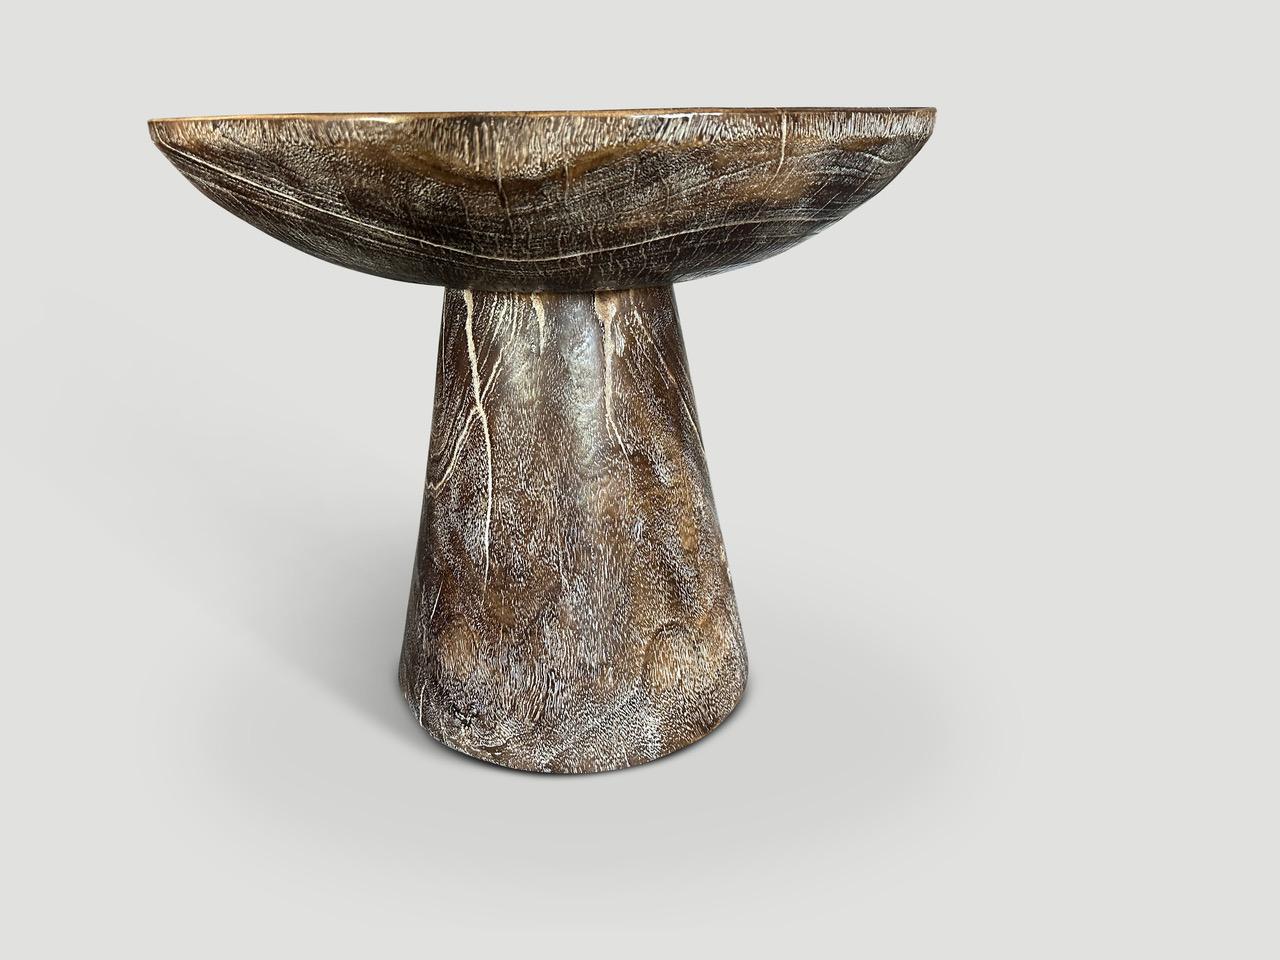 We took a thick slab of mango wood and hand carved a deep bevel to produce this unique side table with a cylinder base. Single charred to a chocolate stain with a ceruse revealing the beautiful wood grain. It’s all in the details.

The Triple Burnt